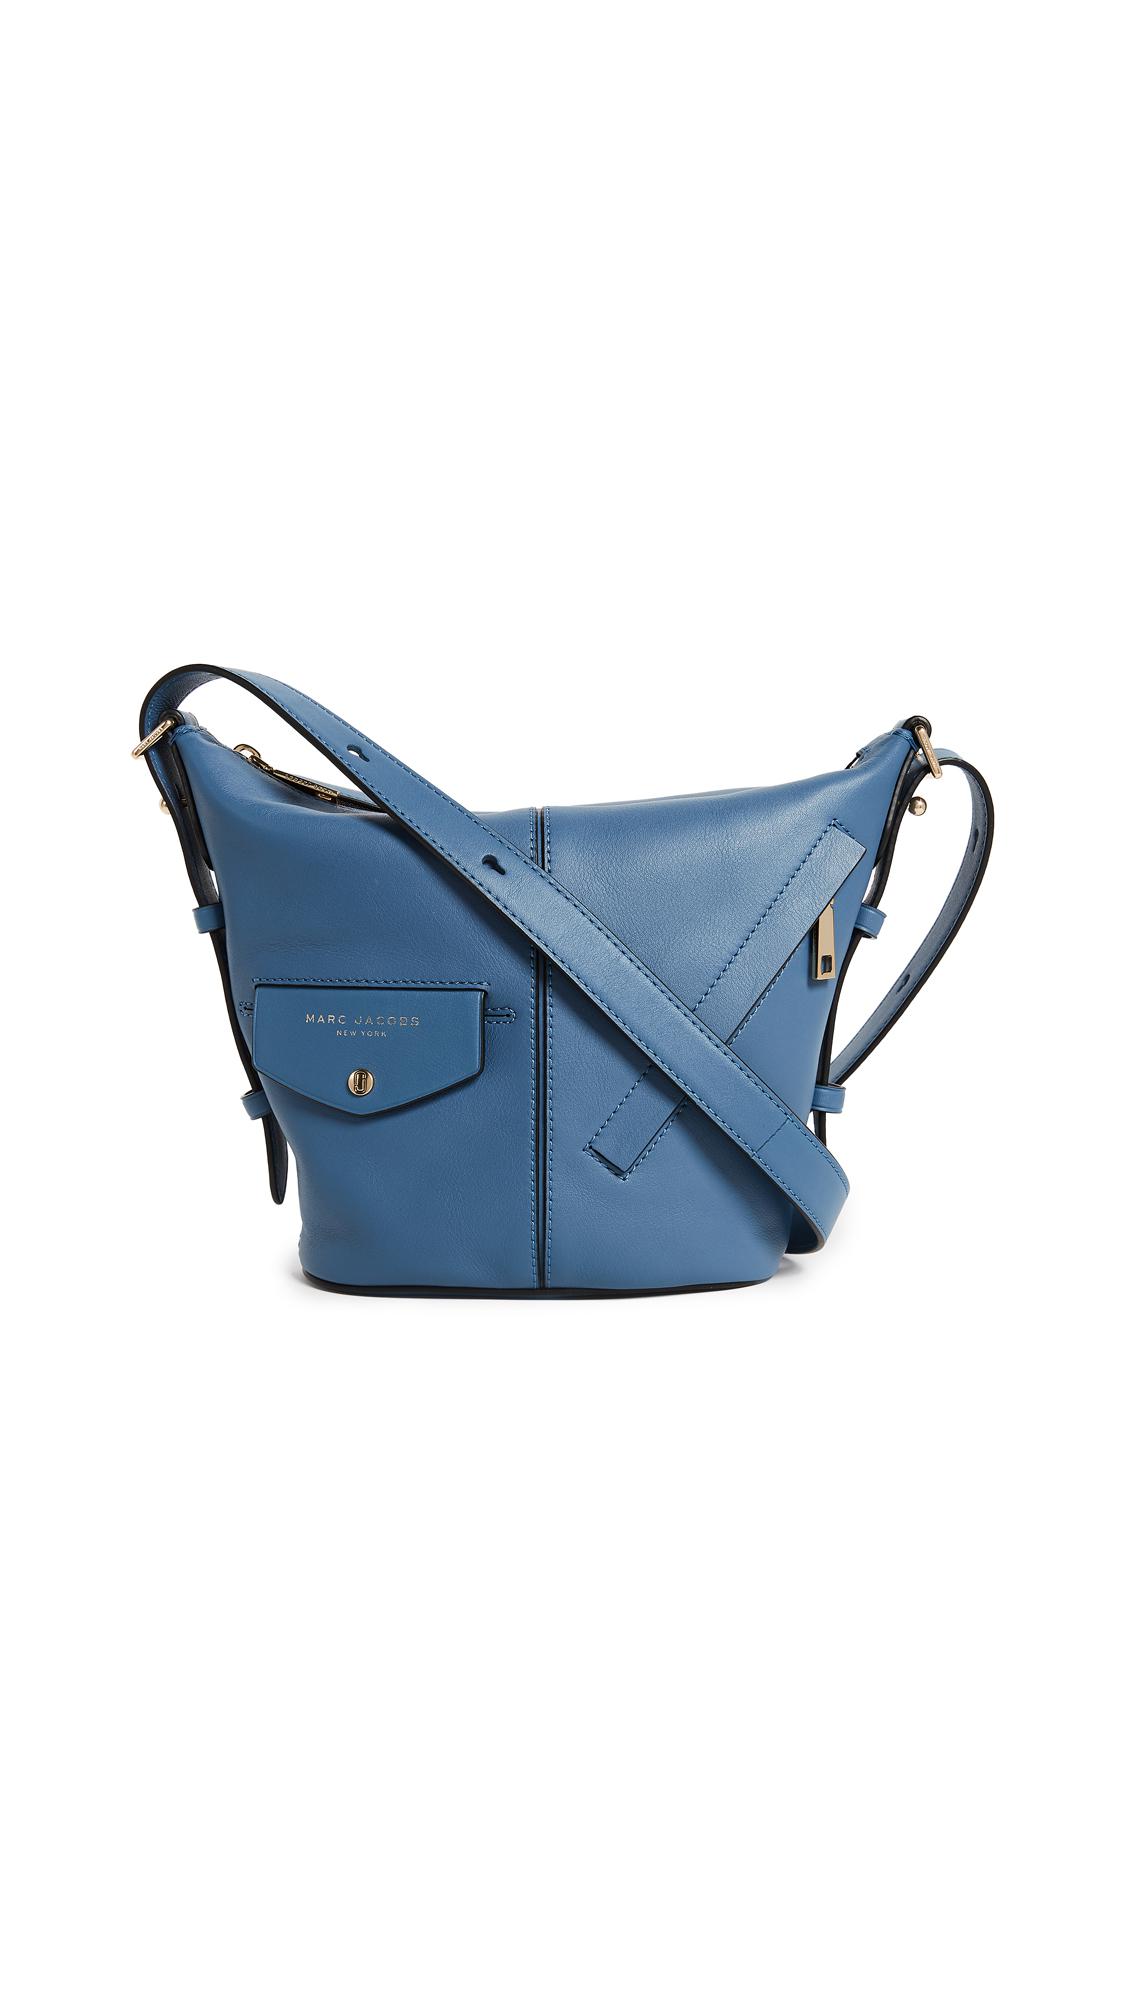 Marc Jacobs Leather The Mini Sling Bag in Blue - Lyst